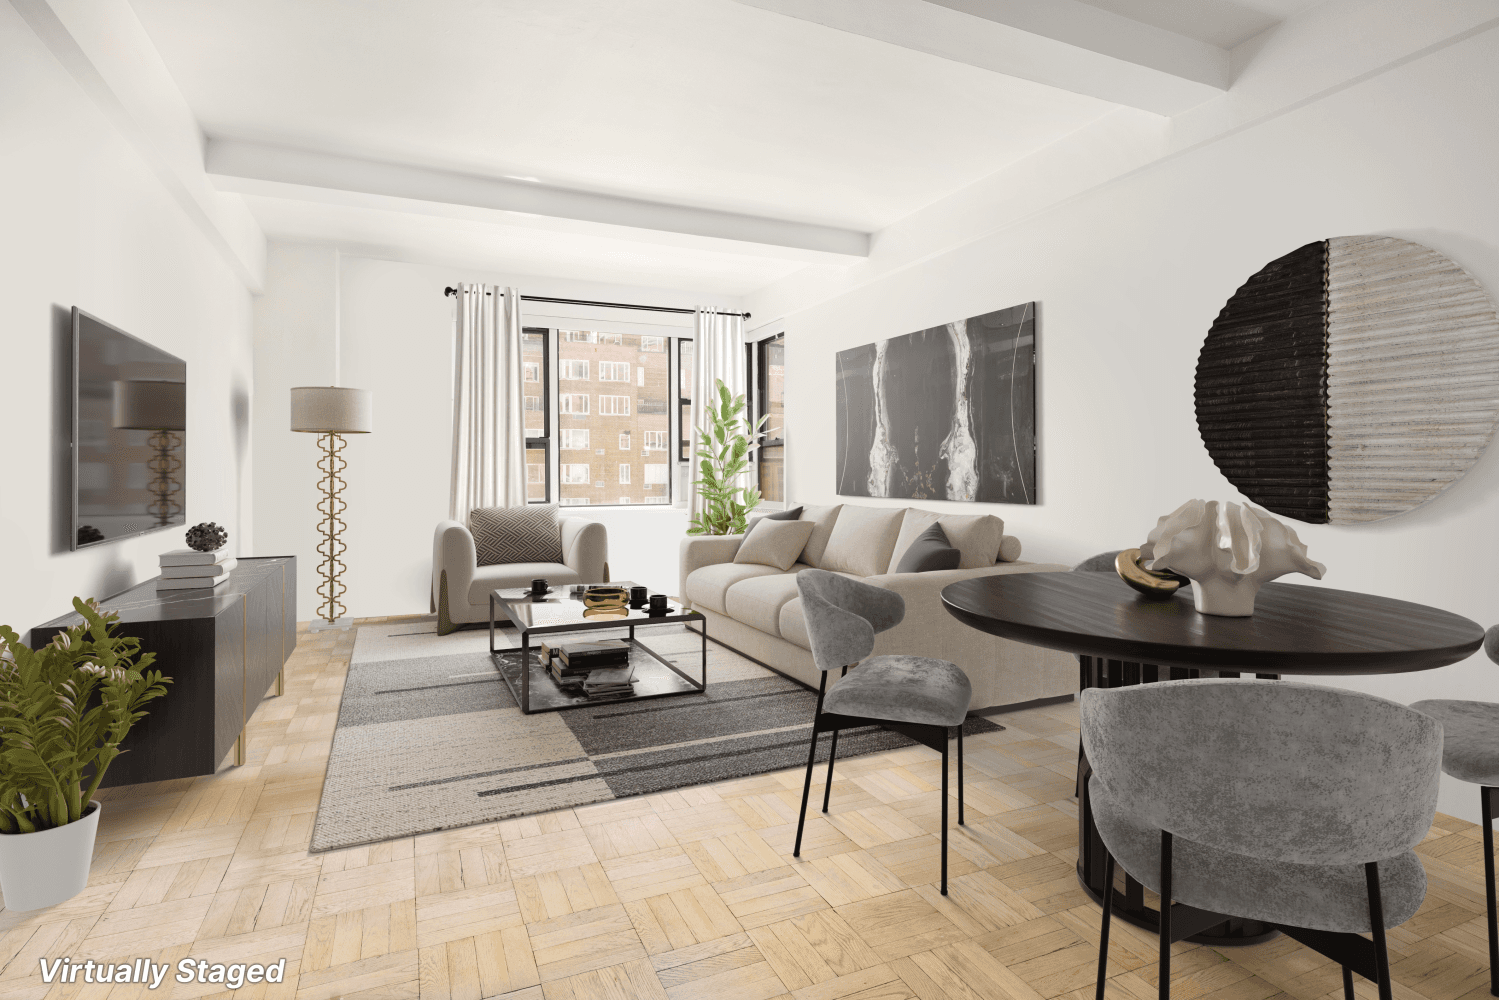 New to the market in Murray Hill, this sunny, serene one bedroom condominium apartment is located on an elegant block on 37th Street between Park and Madison Avenues.